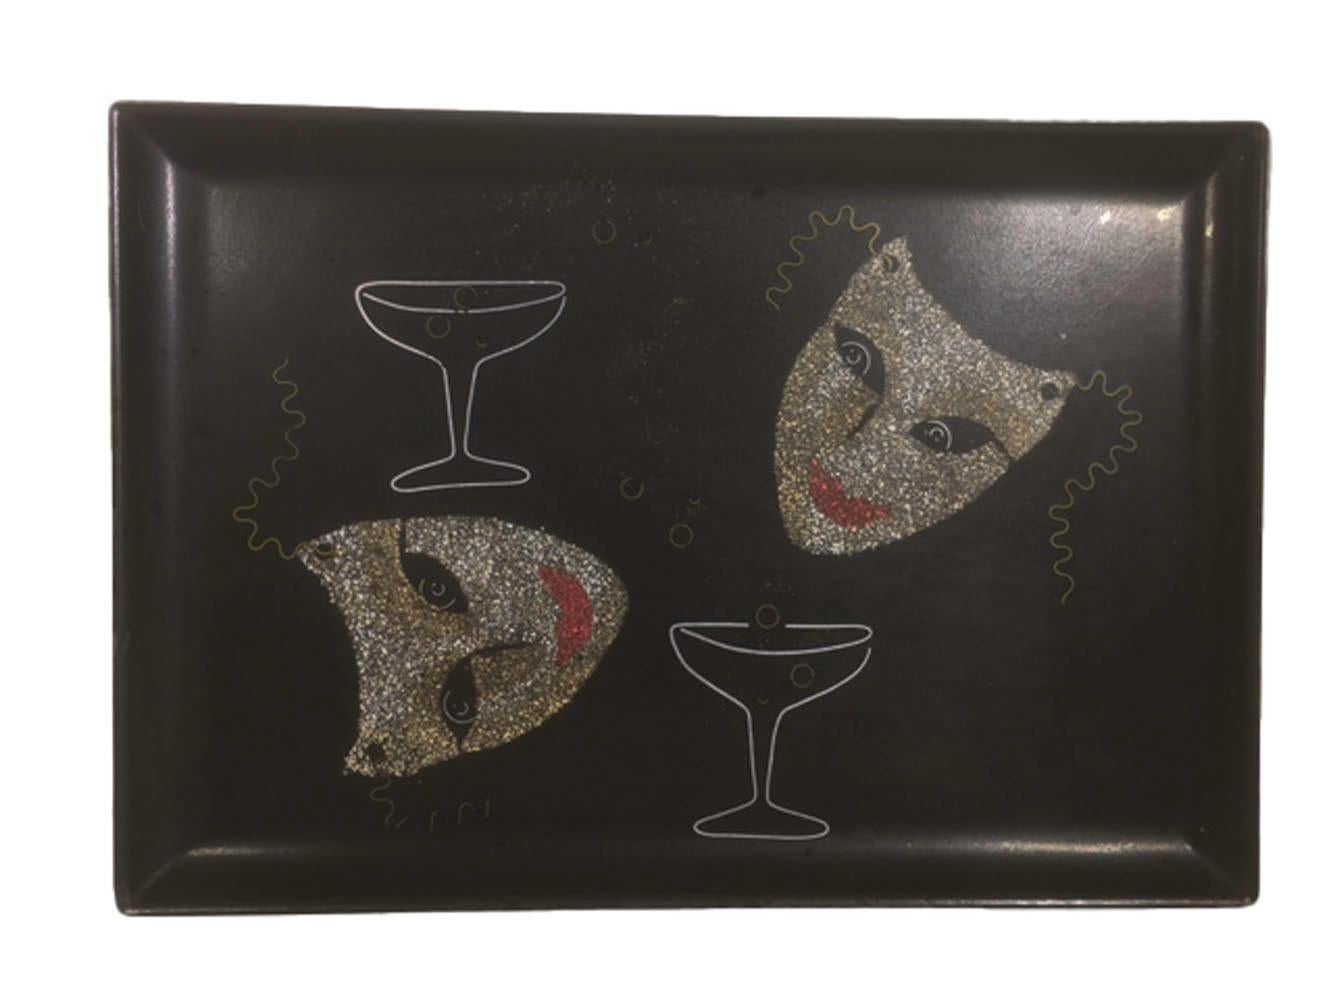 Vintage drinks or serving tray made by Couroc of Monterey, CA. Made of phenolic resin, these trays are resistant to damage by water, alcohol and heat. The craftspeople at Couroc used a combination of materials to inlay the many designs, including